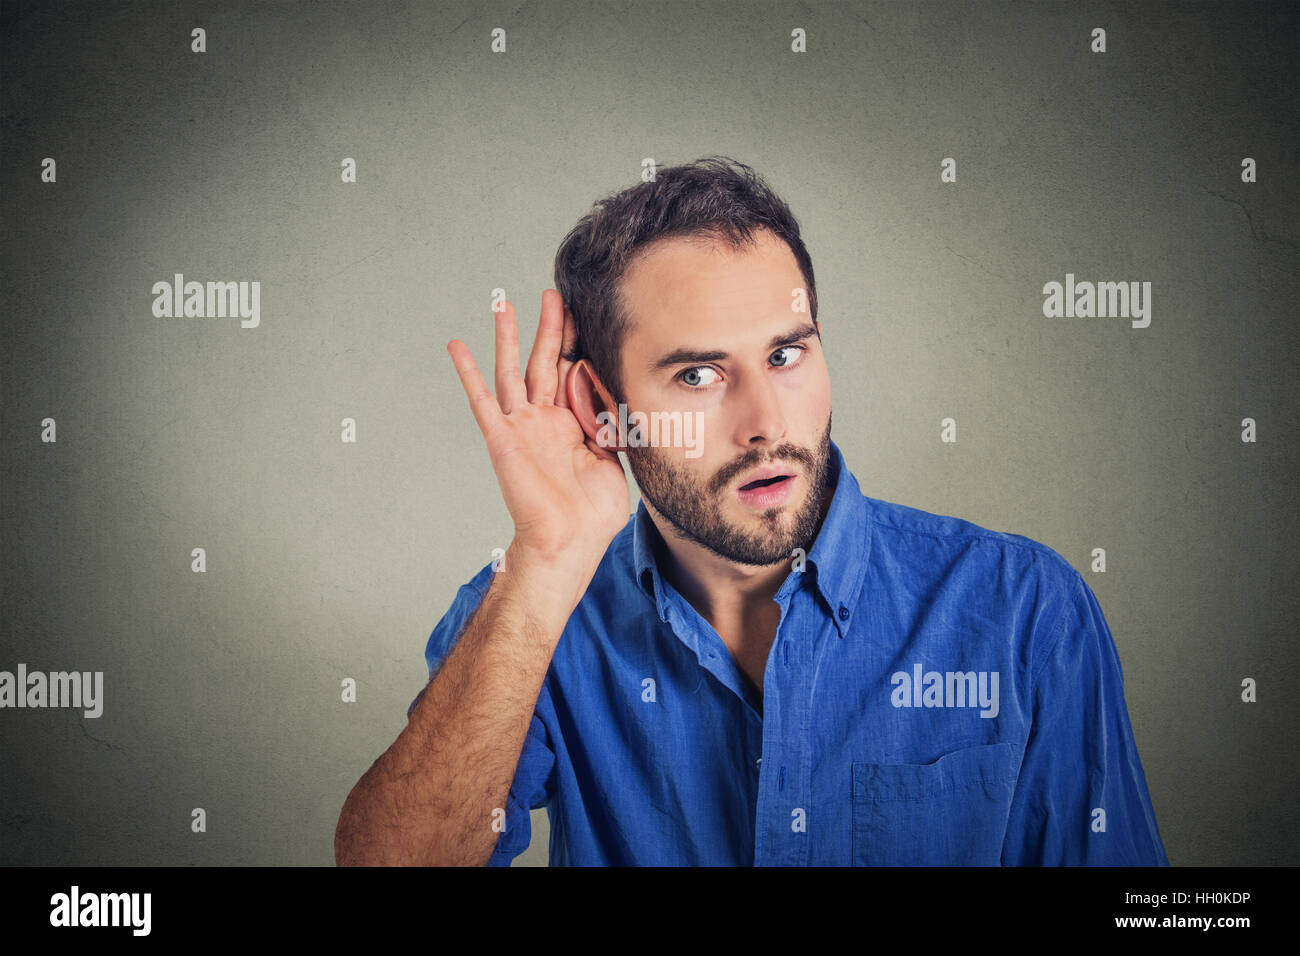 Portrait of handsome man secretly listening on private conversation. Human face, expression, emotion, body language Stock Photo